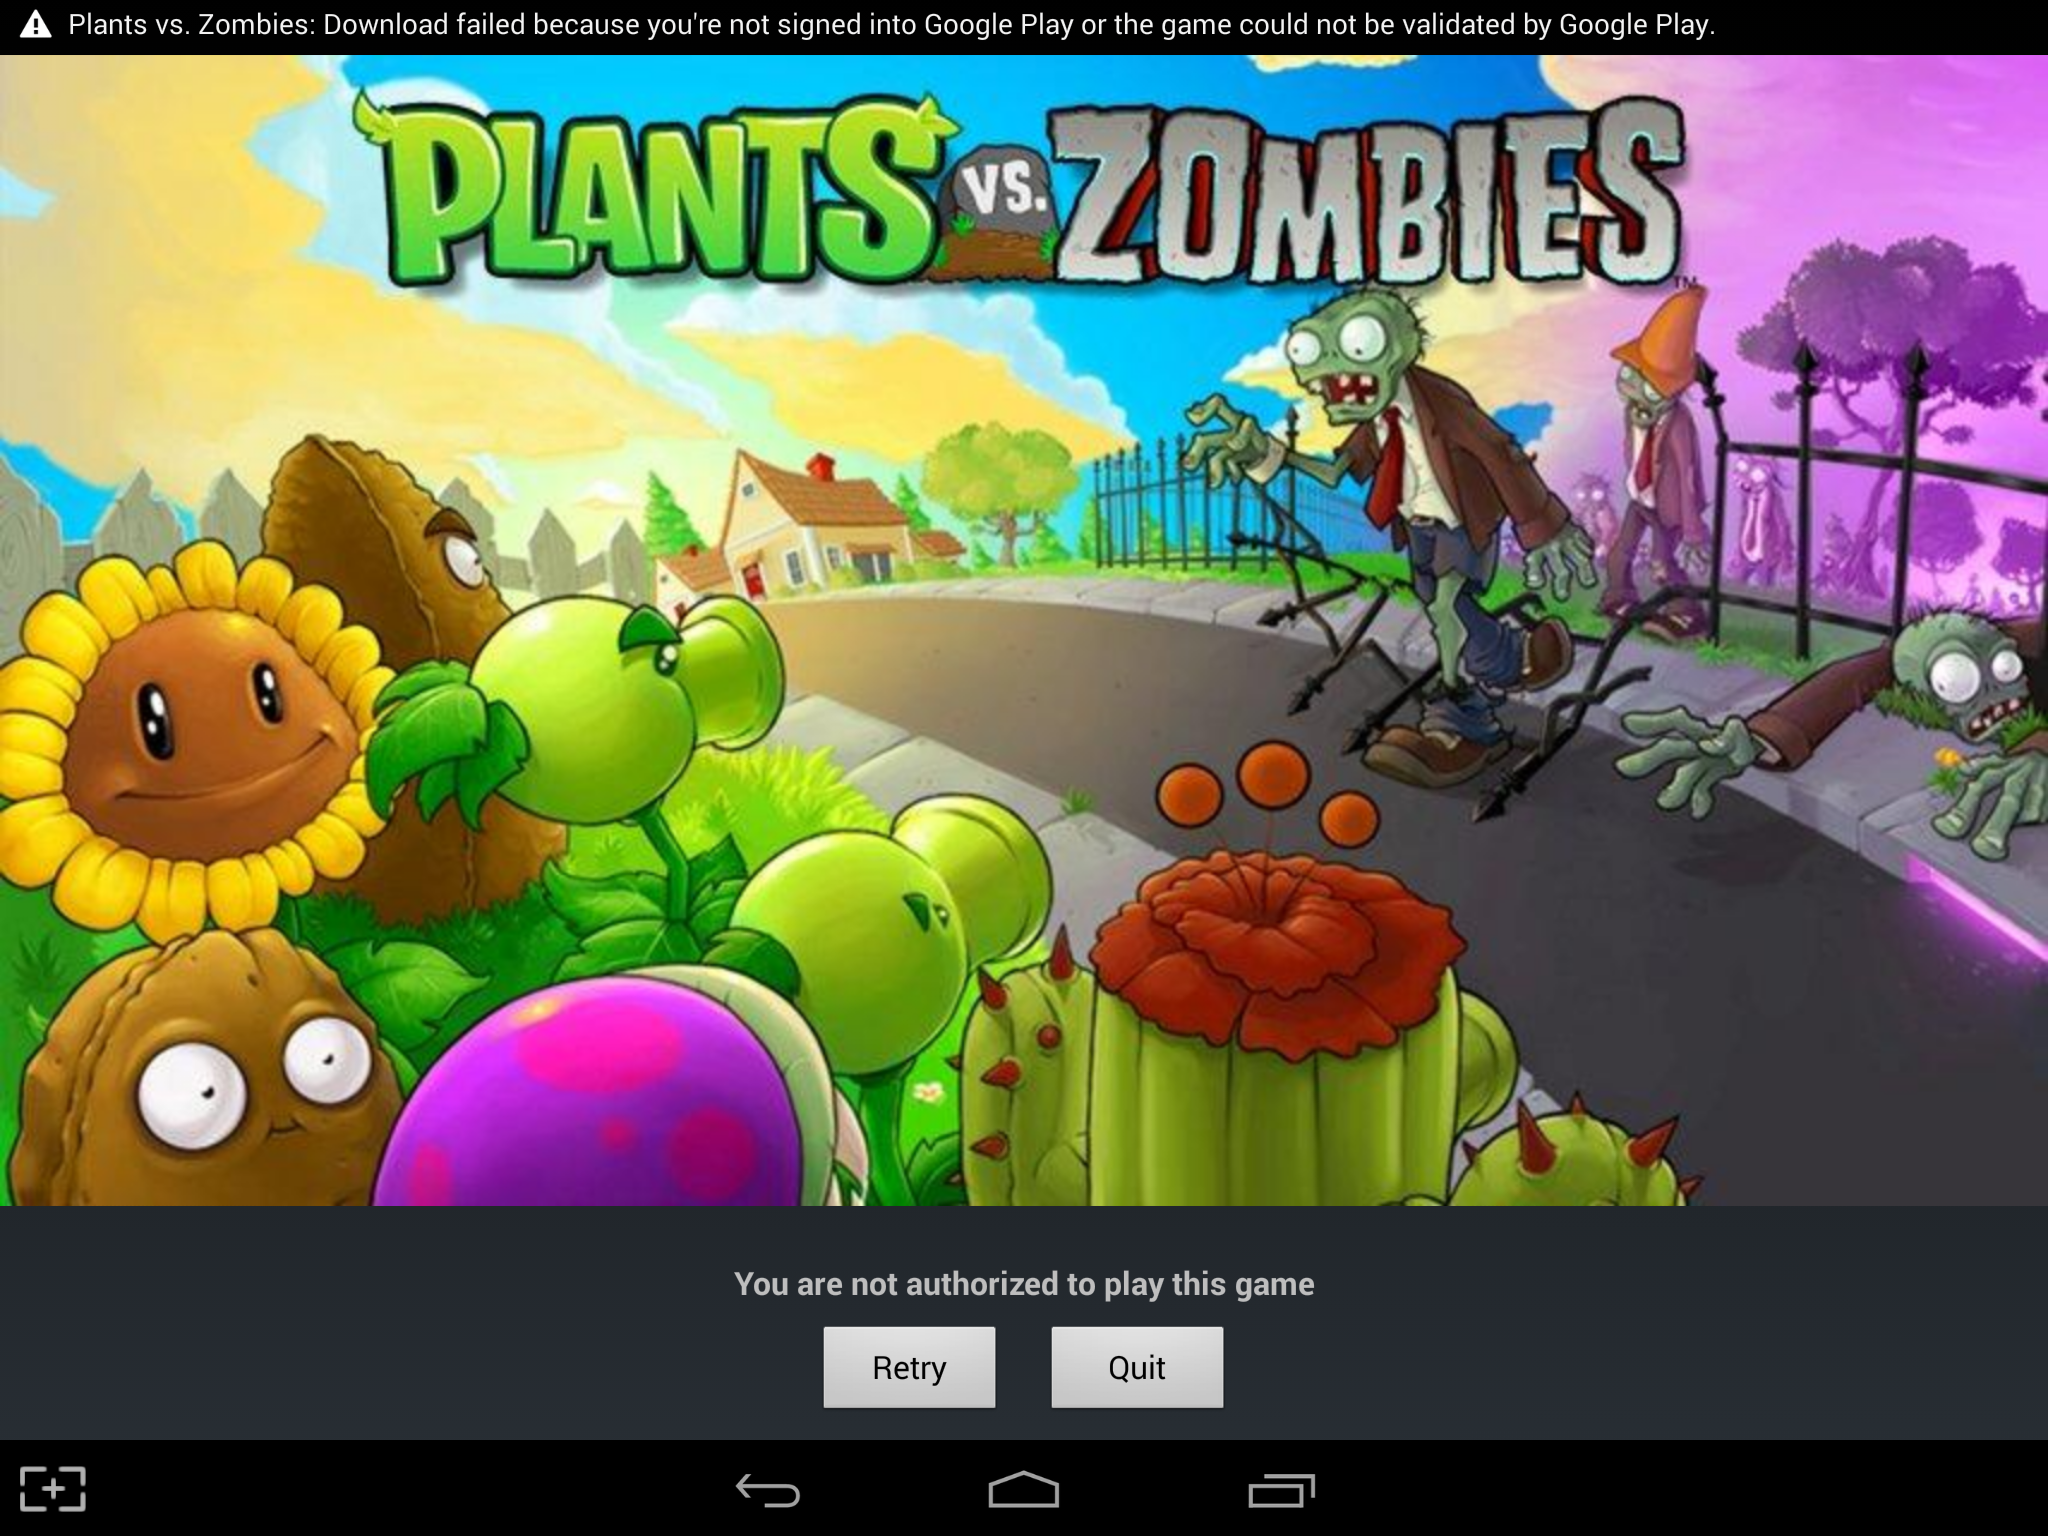 Plants vs zombies 2 not on steam фото 117